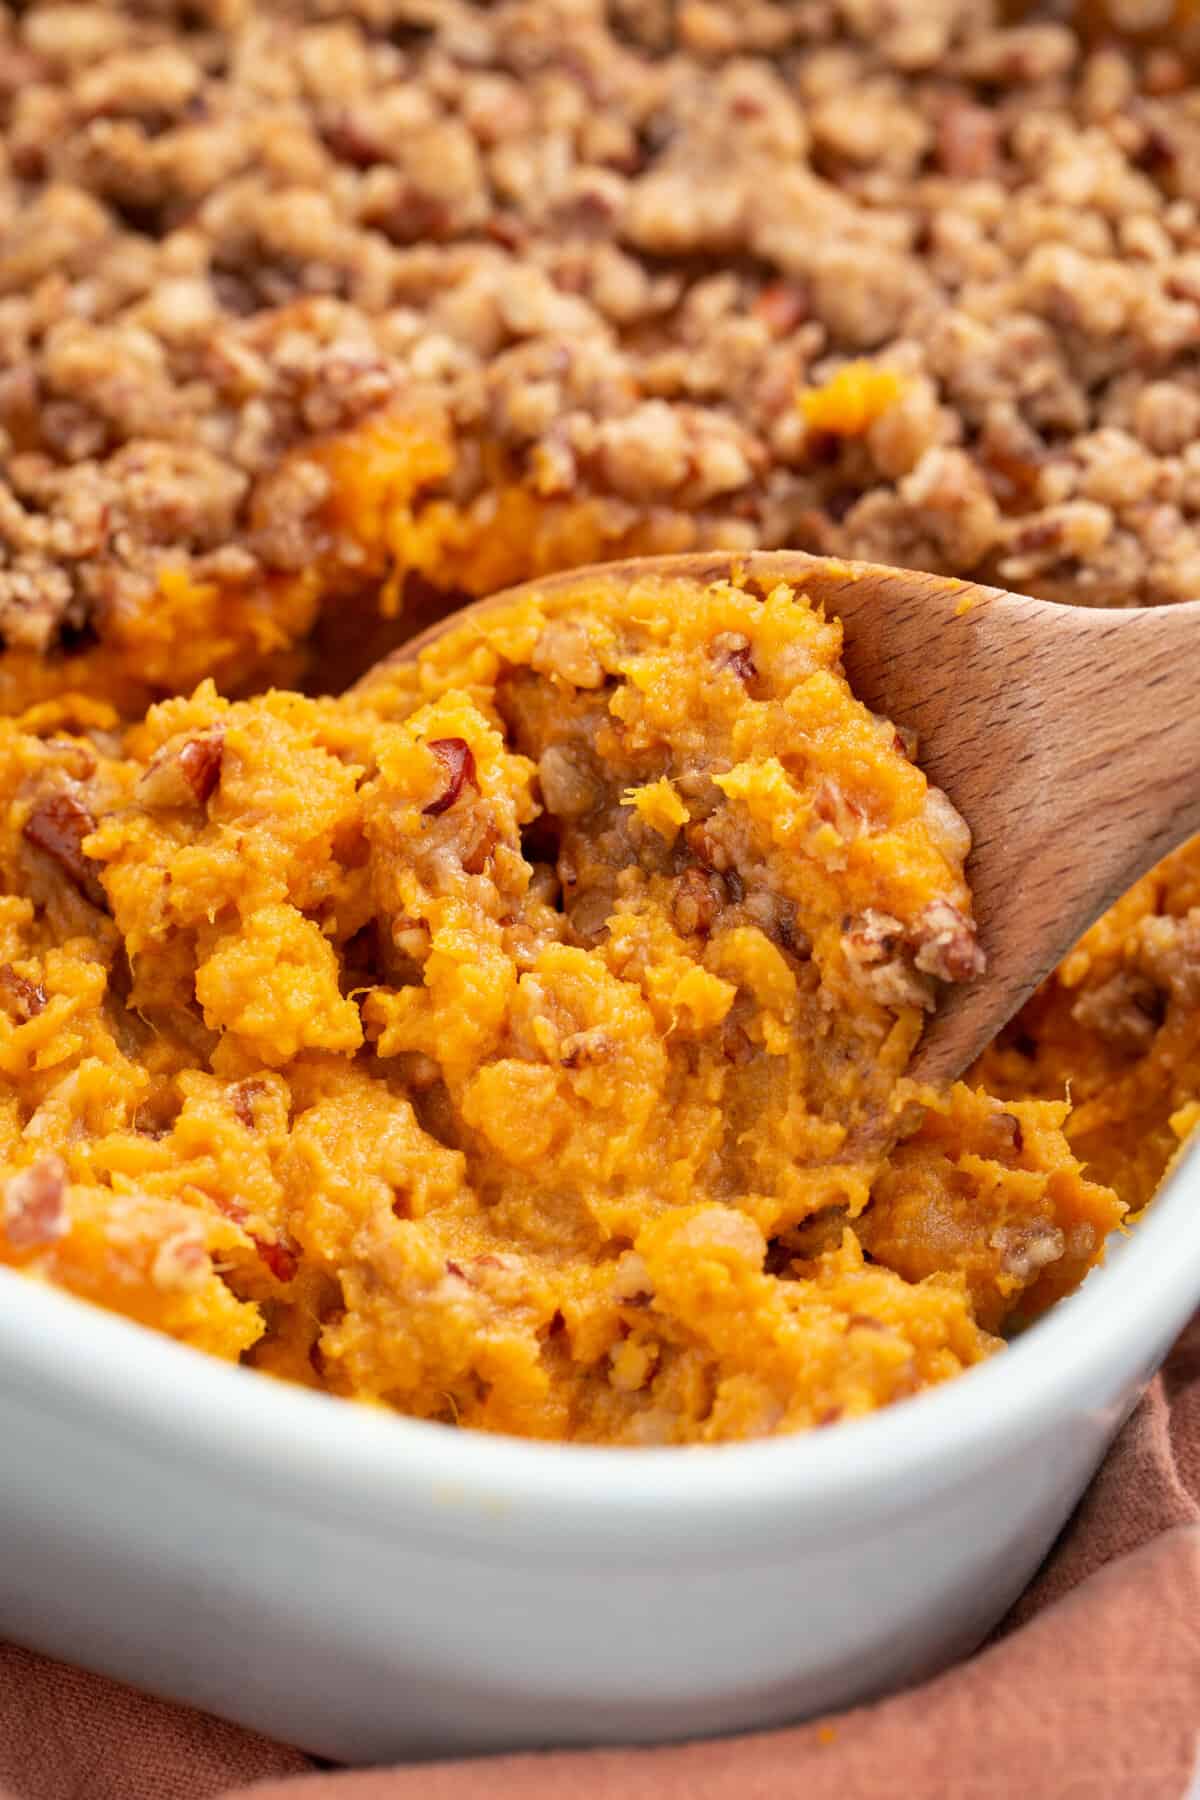 close up image of wooden spoon digging into yam casserole